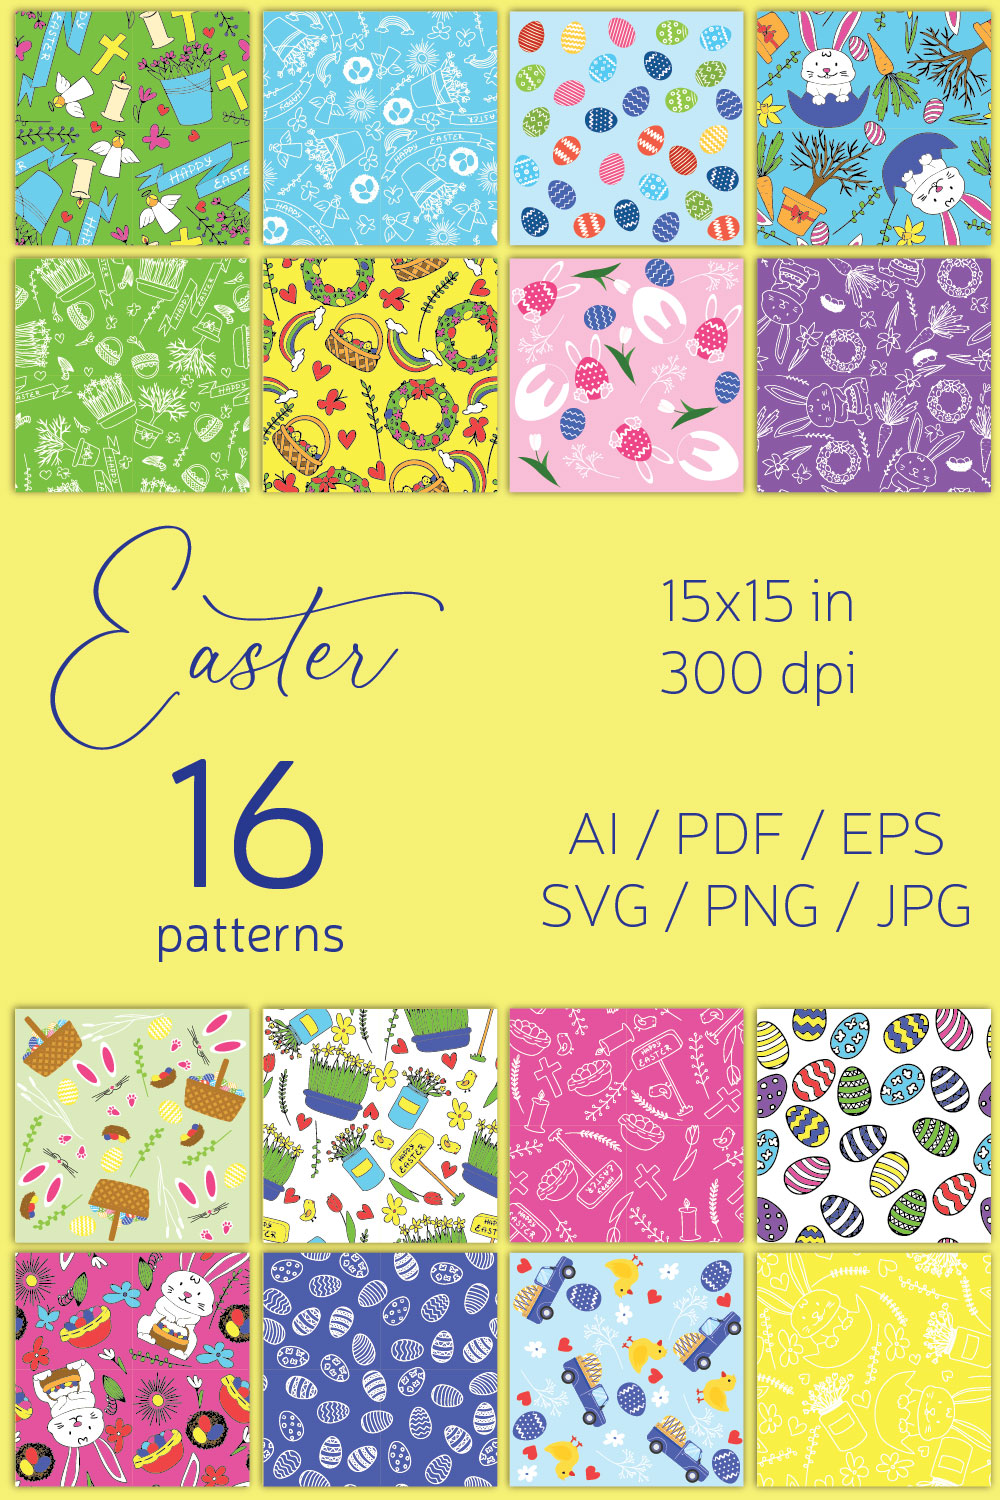 Collage with seamless colorful patterns with Easter pictures.